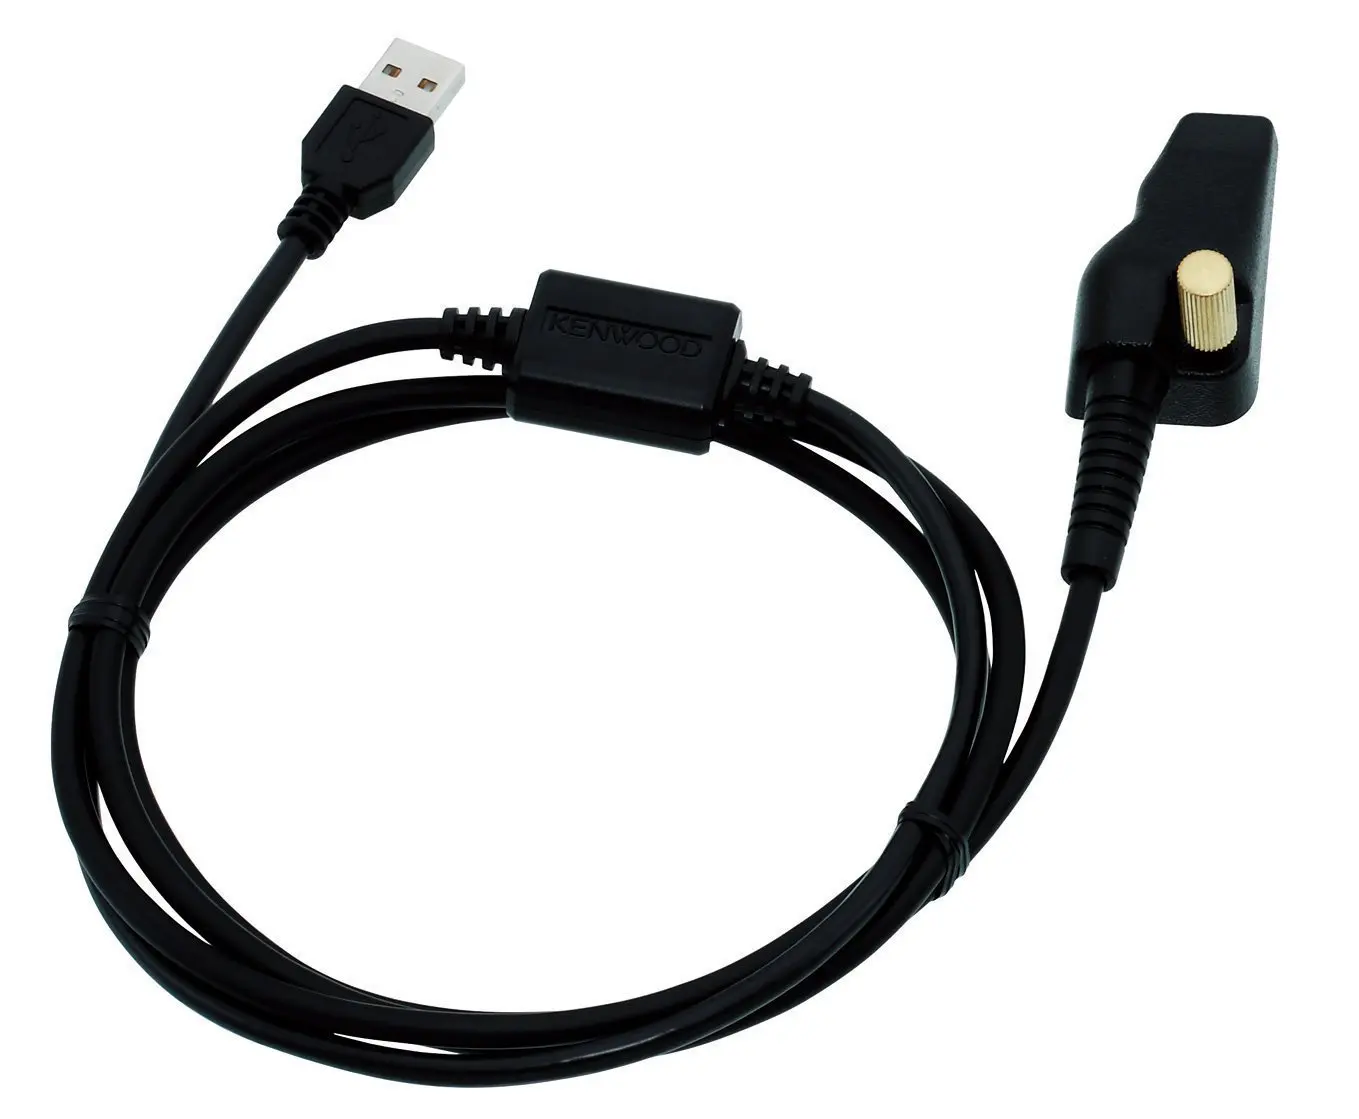 Cheap Kenwood Programming Cable Driver, find Kenwood Programming Cable Driver deals on line at